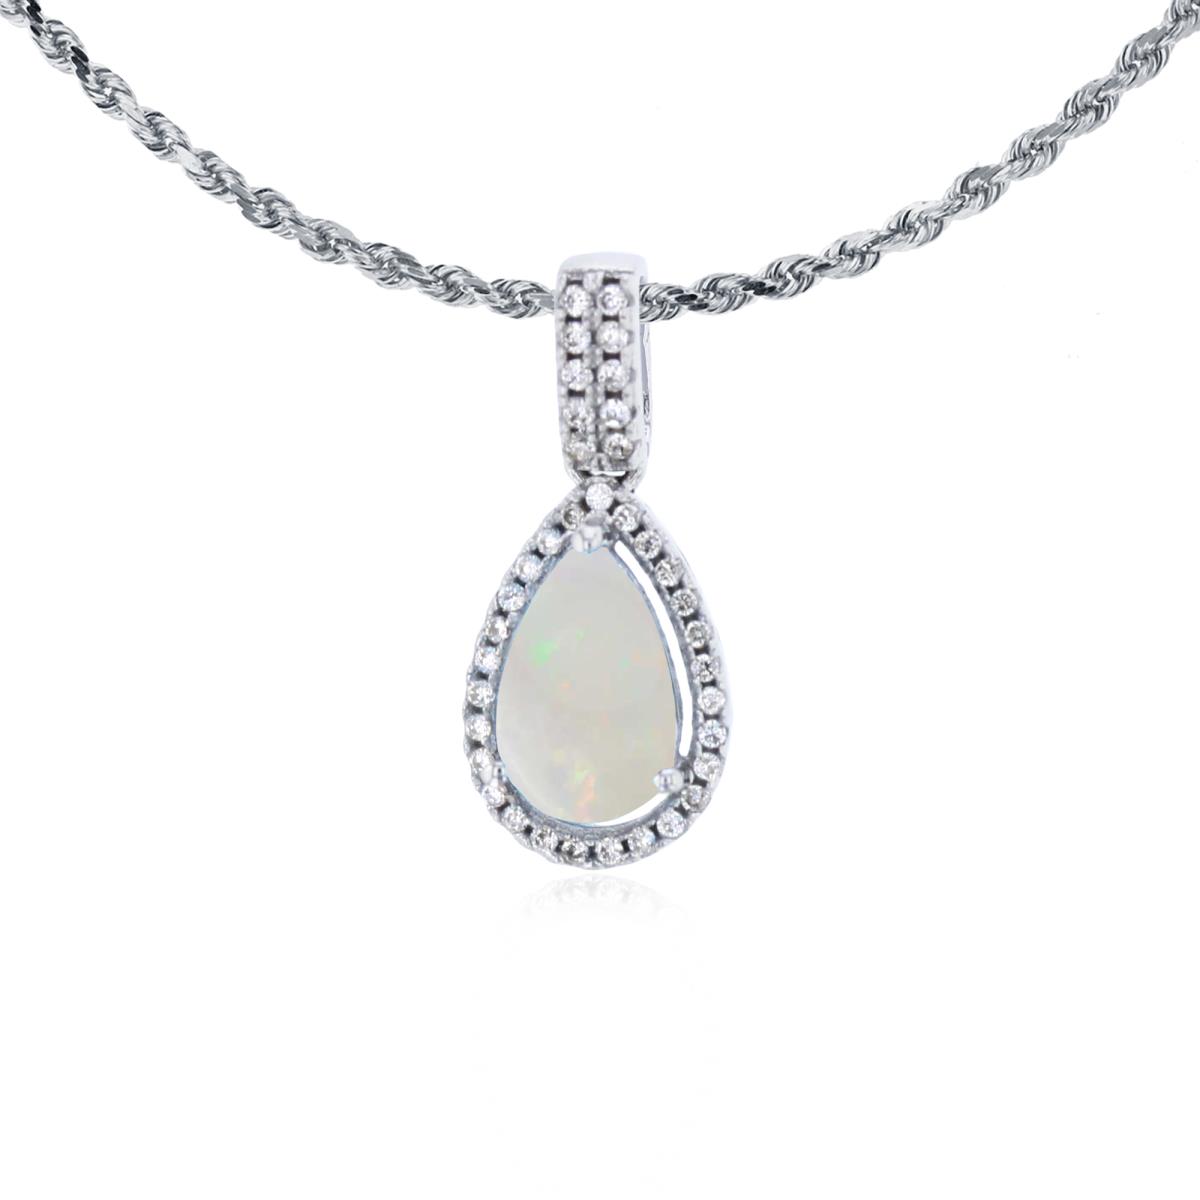 10K White Gold 8x5mm Pear Cut Opal & 0.11 CTTW Diamond Halo 18" Rope Chain Necklace